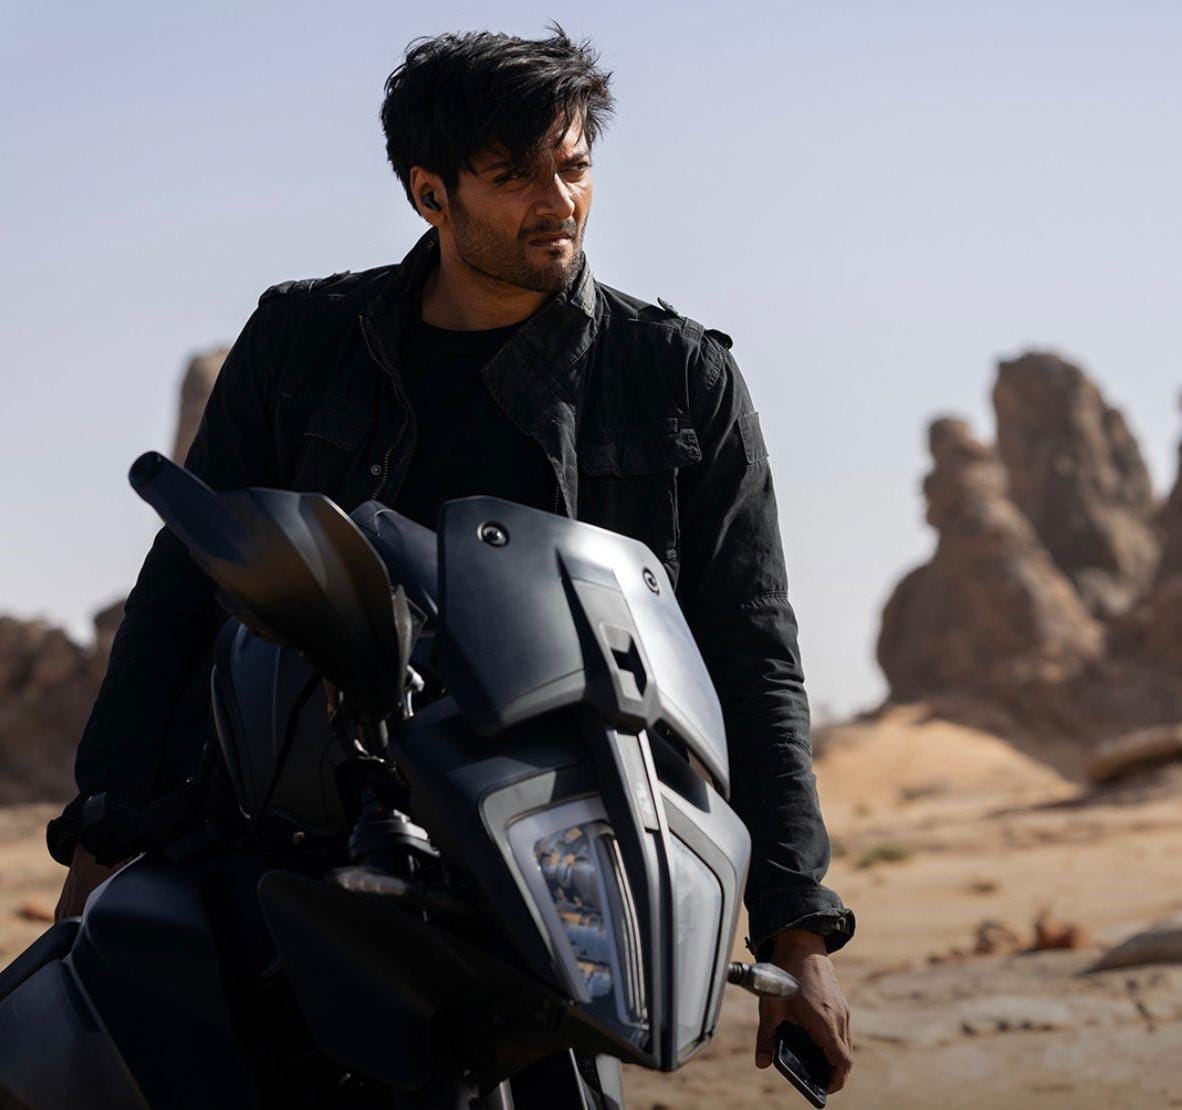  Ali Fazal's Entry Shot For 'kandahar' Was One Of His 'most Difficult Scenes'-TeluguStop.com